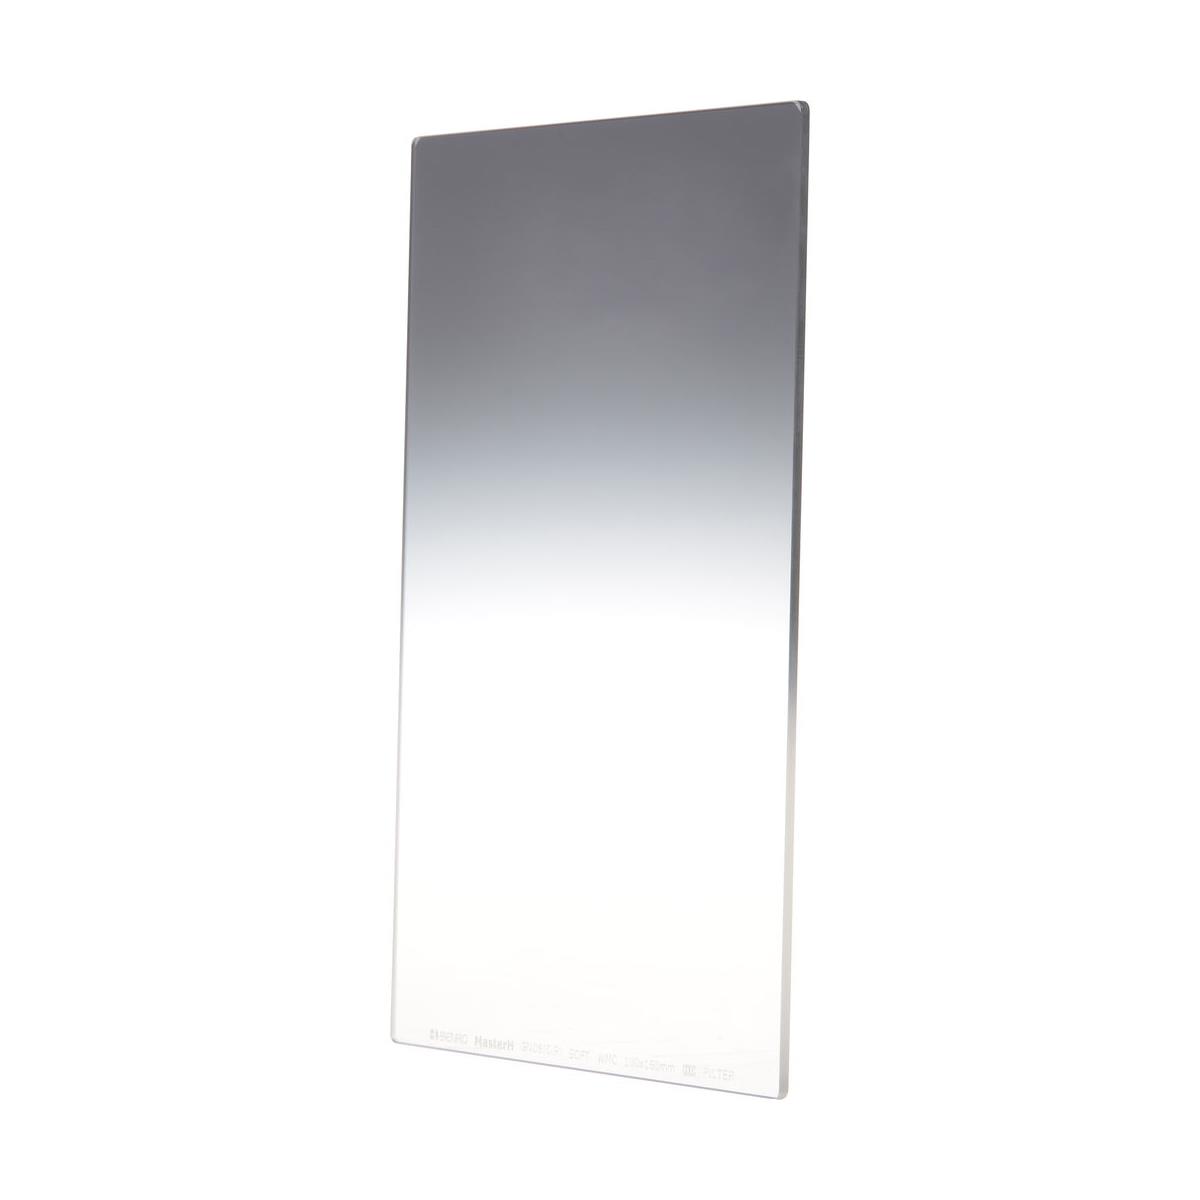 Image of Benro 100x150mm Master Hardened Glass Soft Graduated 0.9 ND Filter